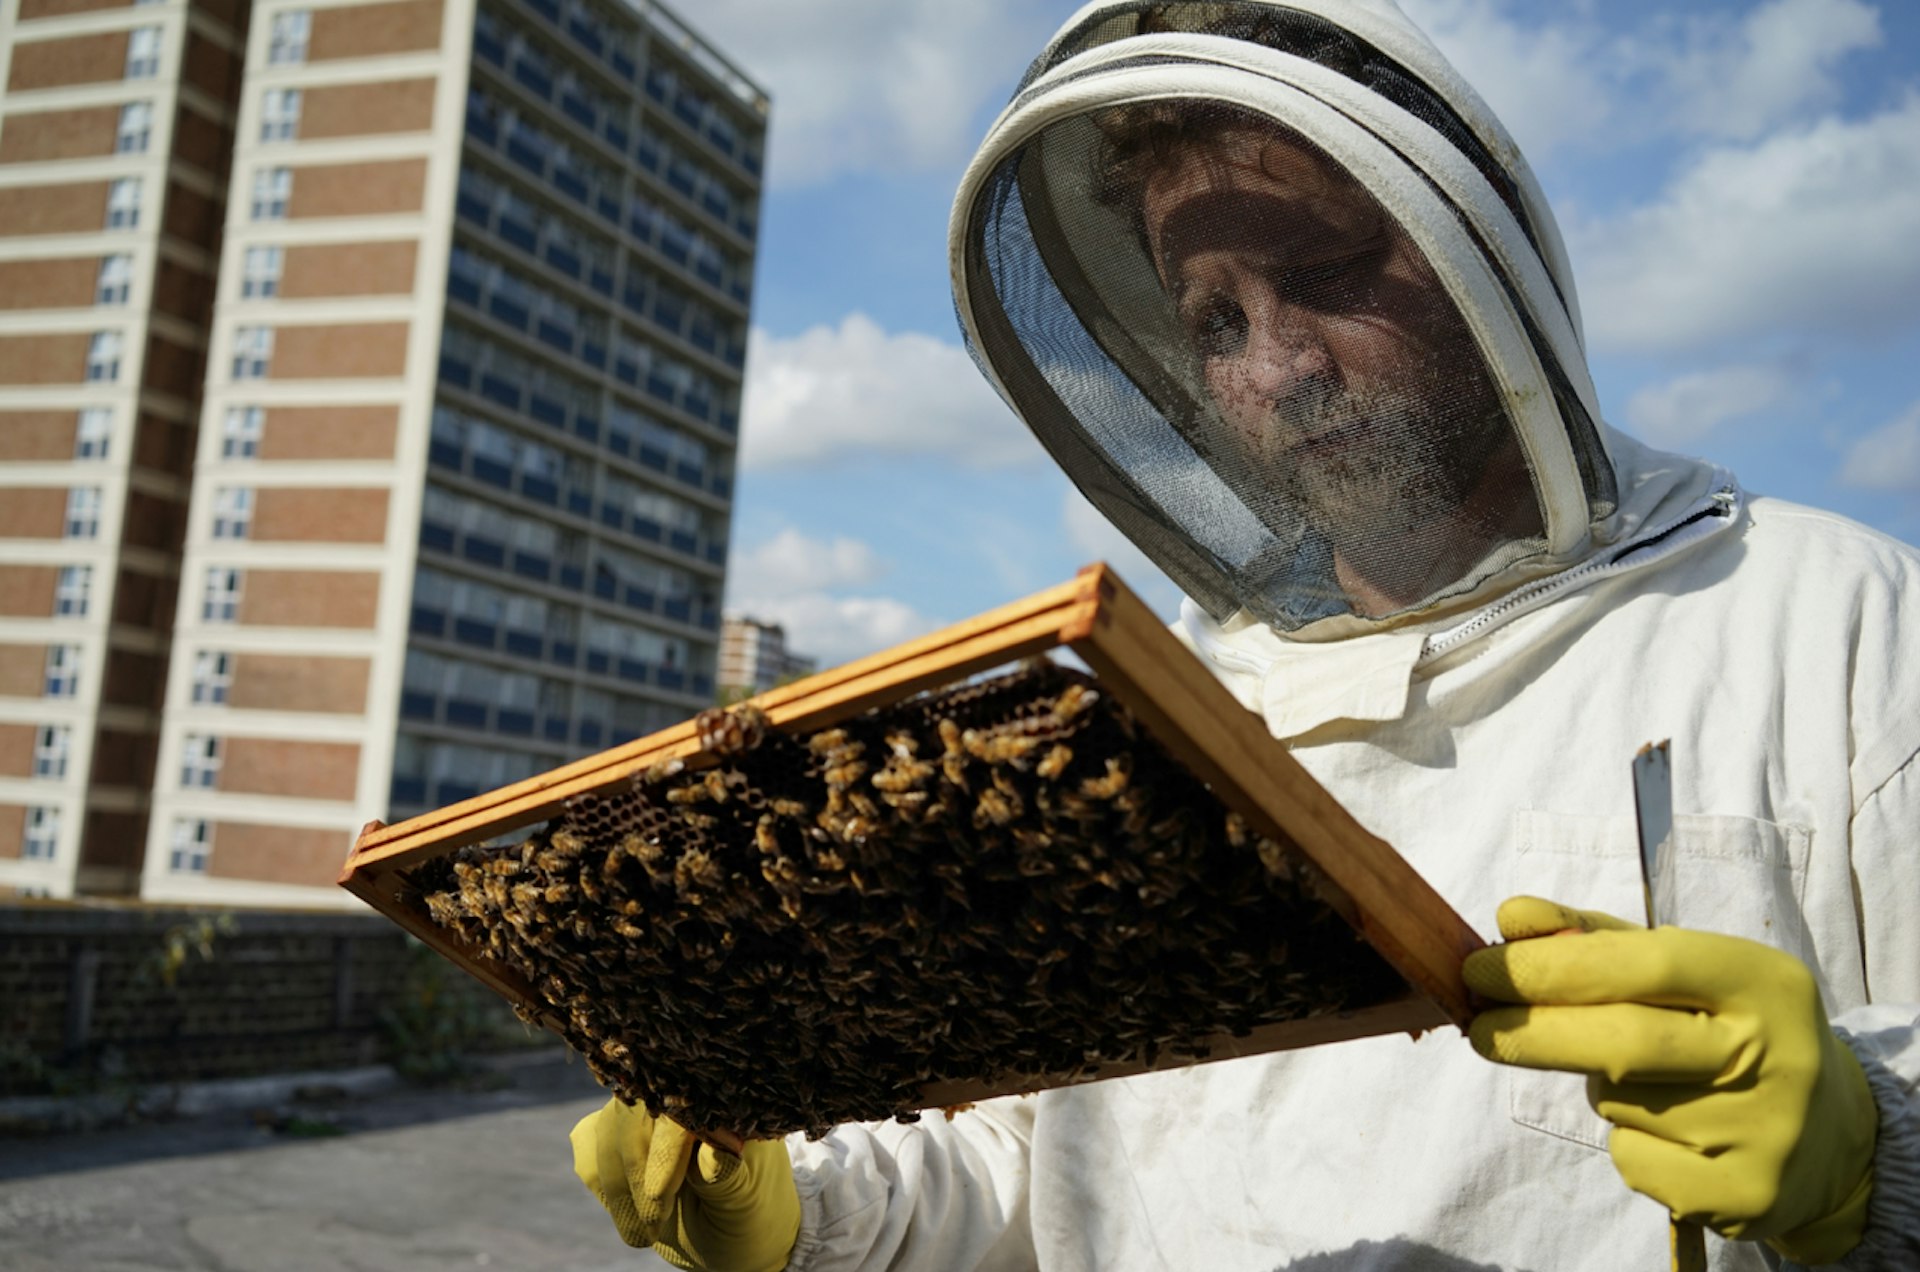 The Londoners fighting to save the planet with bumble bees